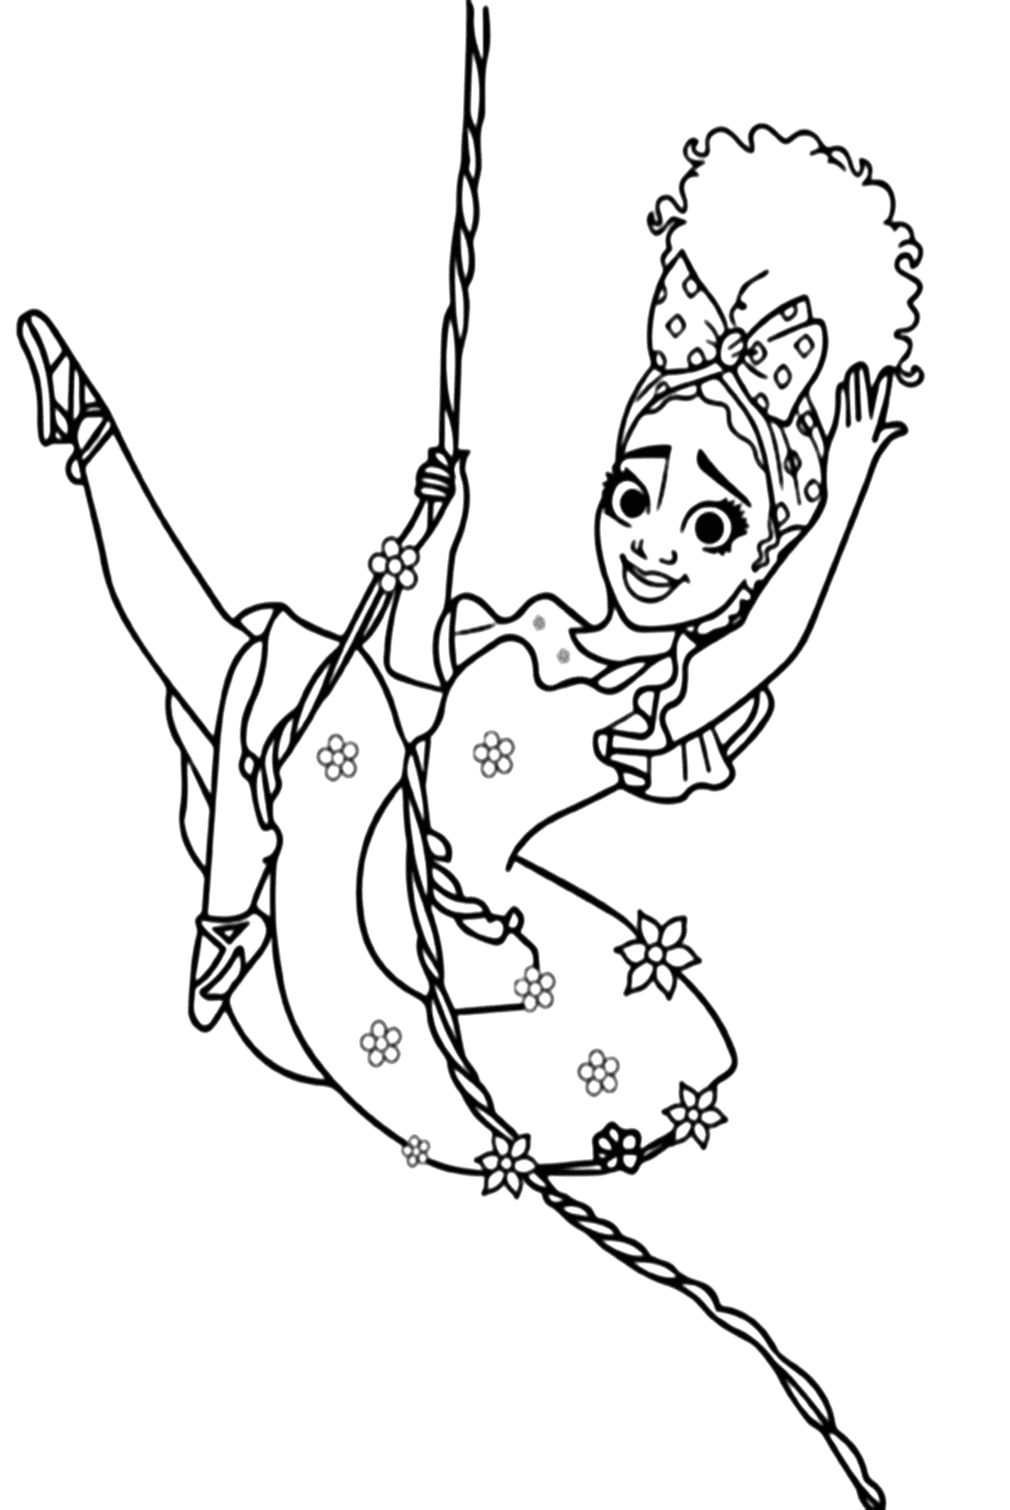 🖍️ Encanto Mirabel on Swing - Printable Coloring Page for Free